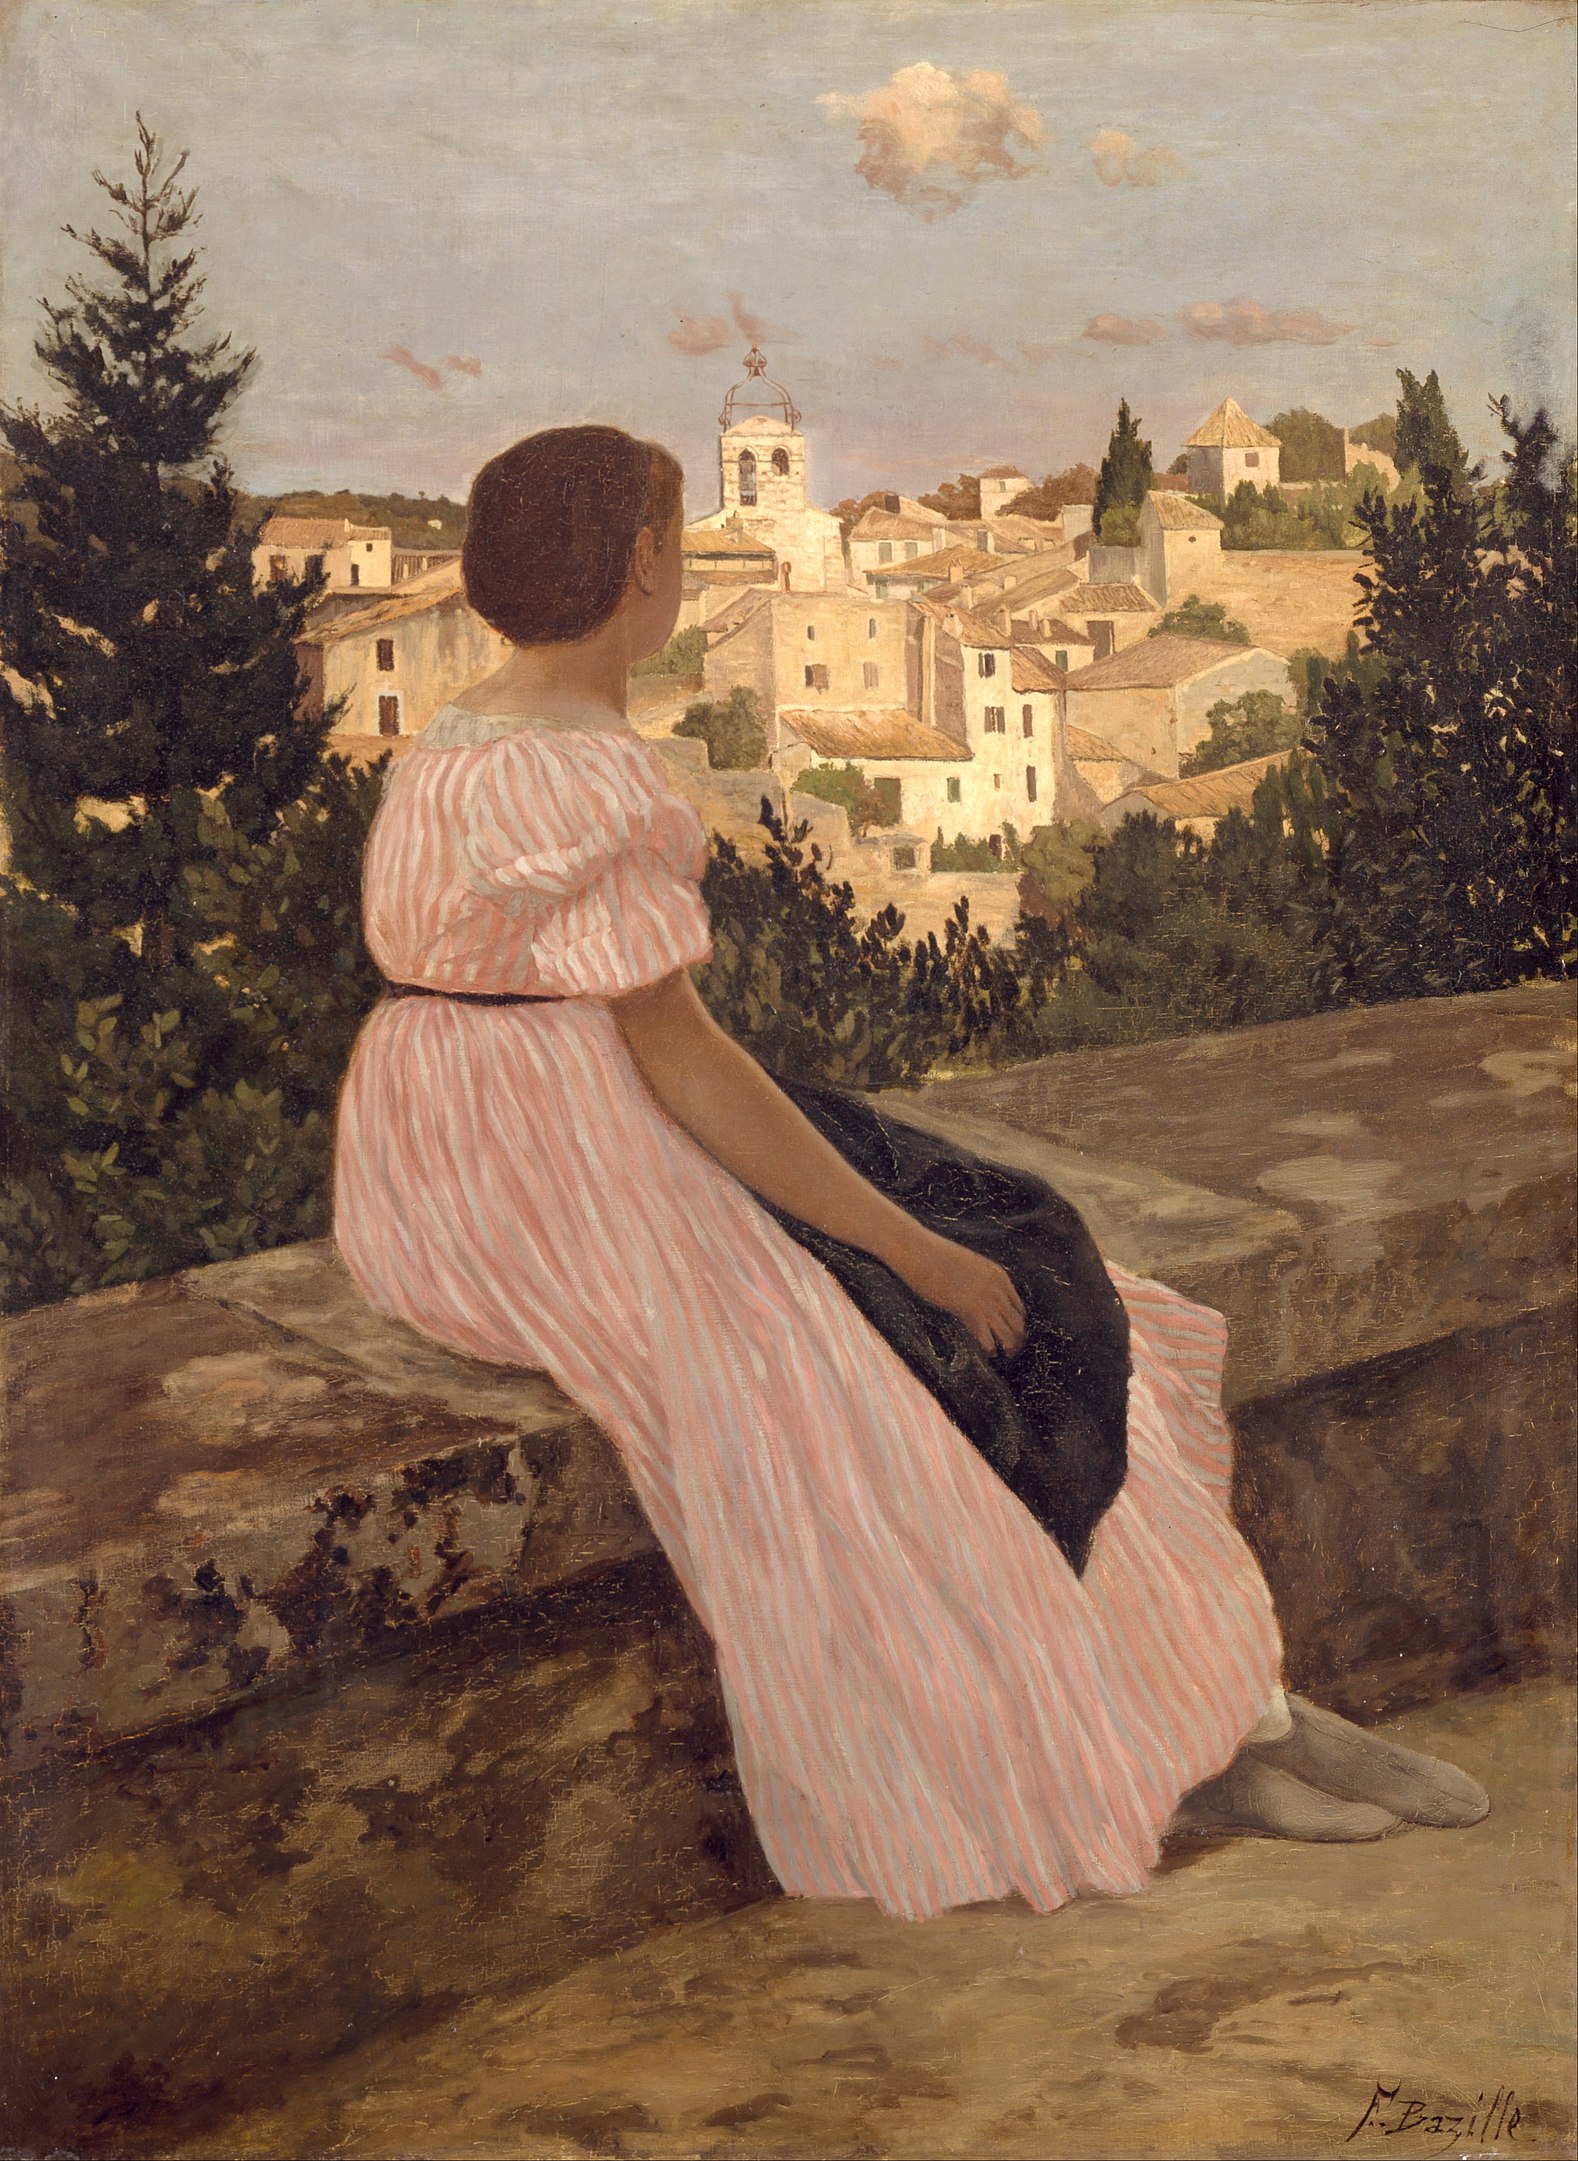 A woman in a pink dress sitting on a ledge observing a town in the distance